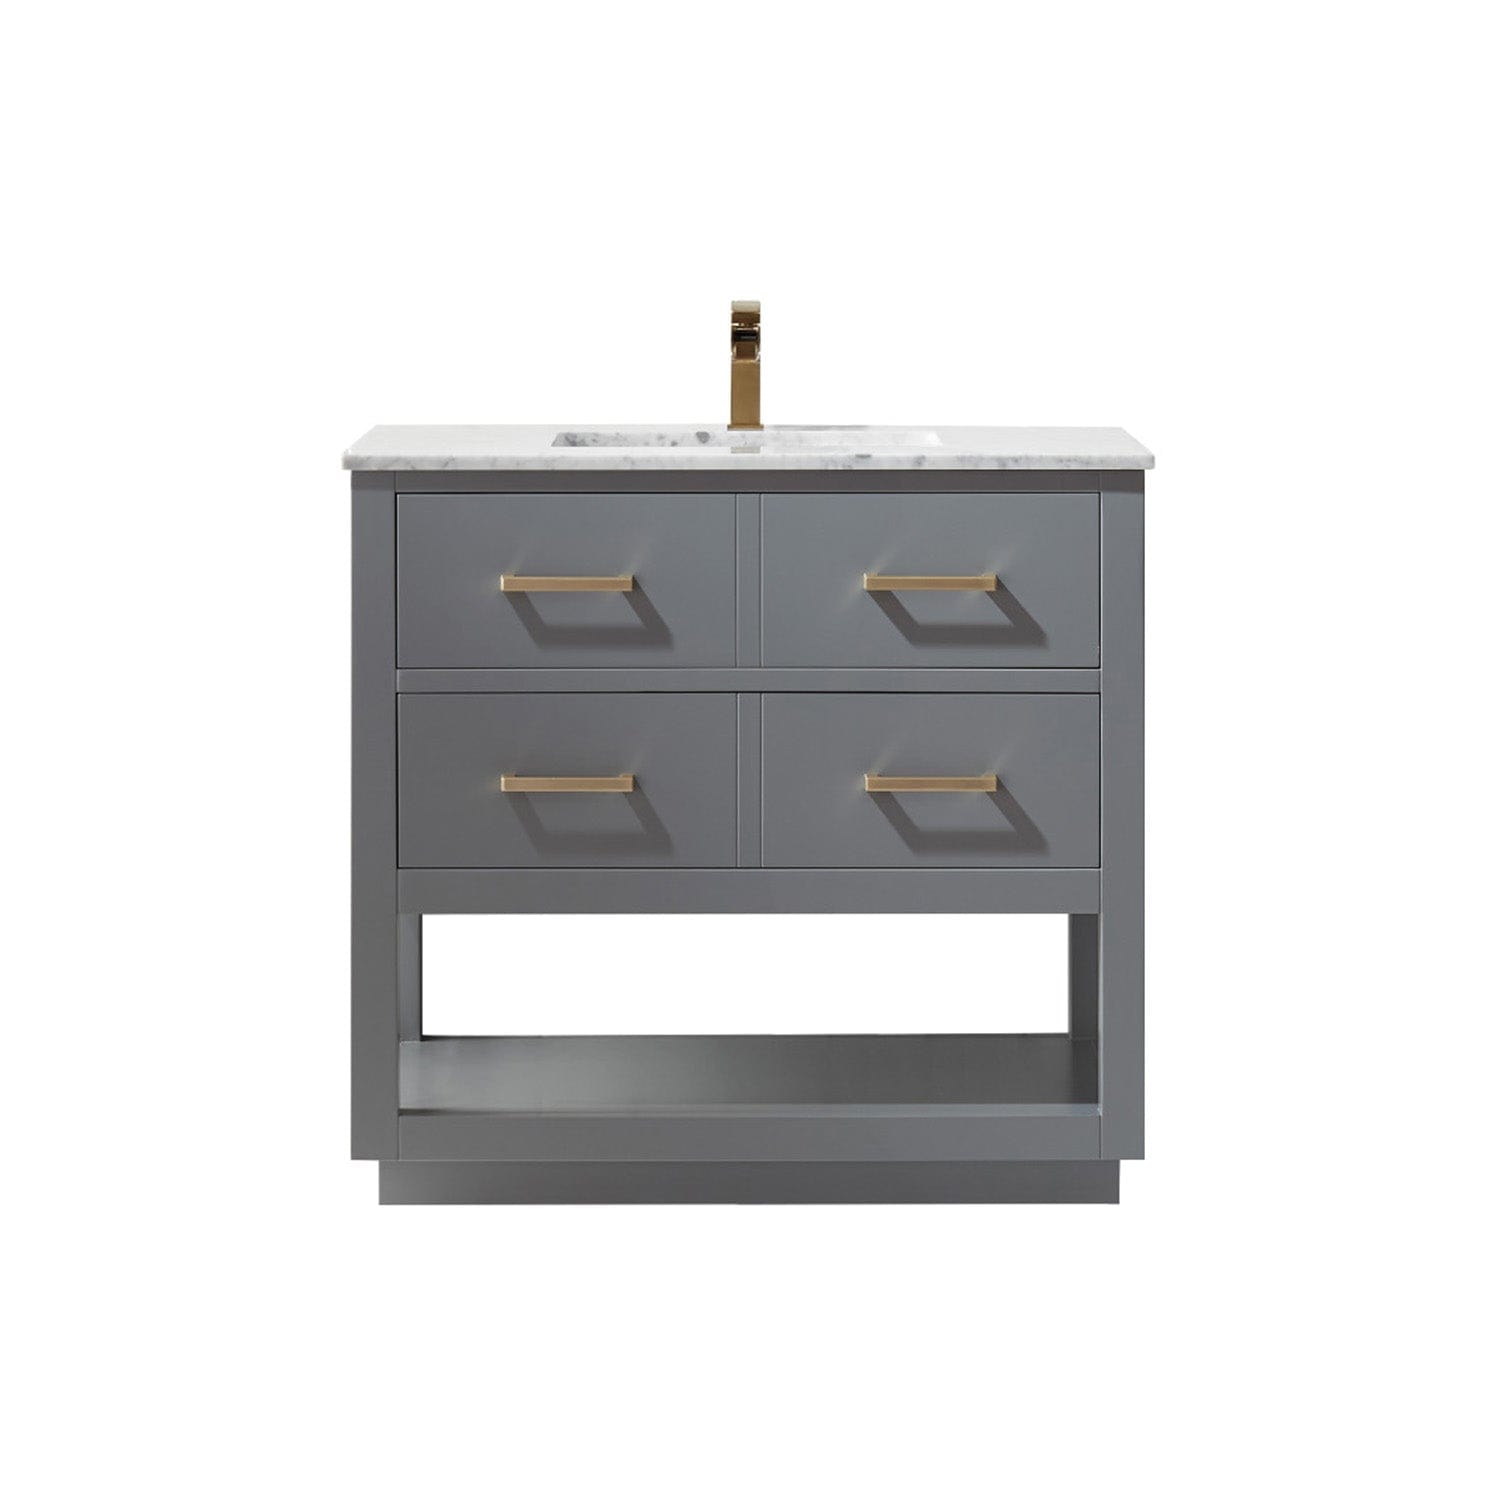 Altair Remi 36" Single Bathroom Vanity Set in Gray and Carrara White Marble Countertop without Mirror 532036-GR-CA-NM - Molaix631112971409Vanity532036-GR-CA-NM